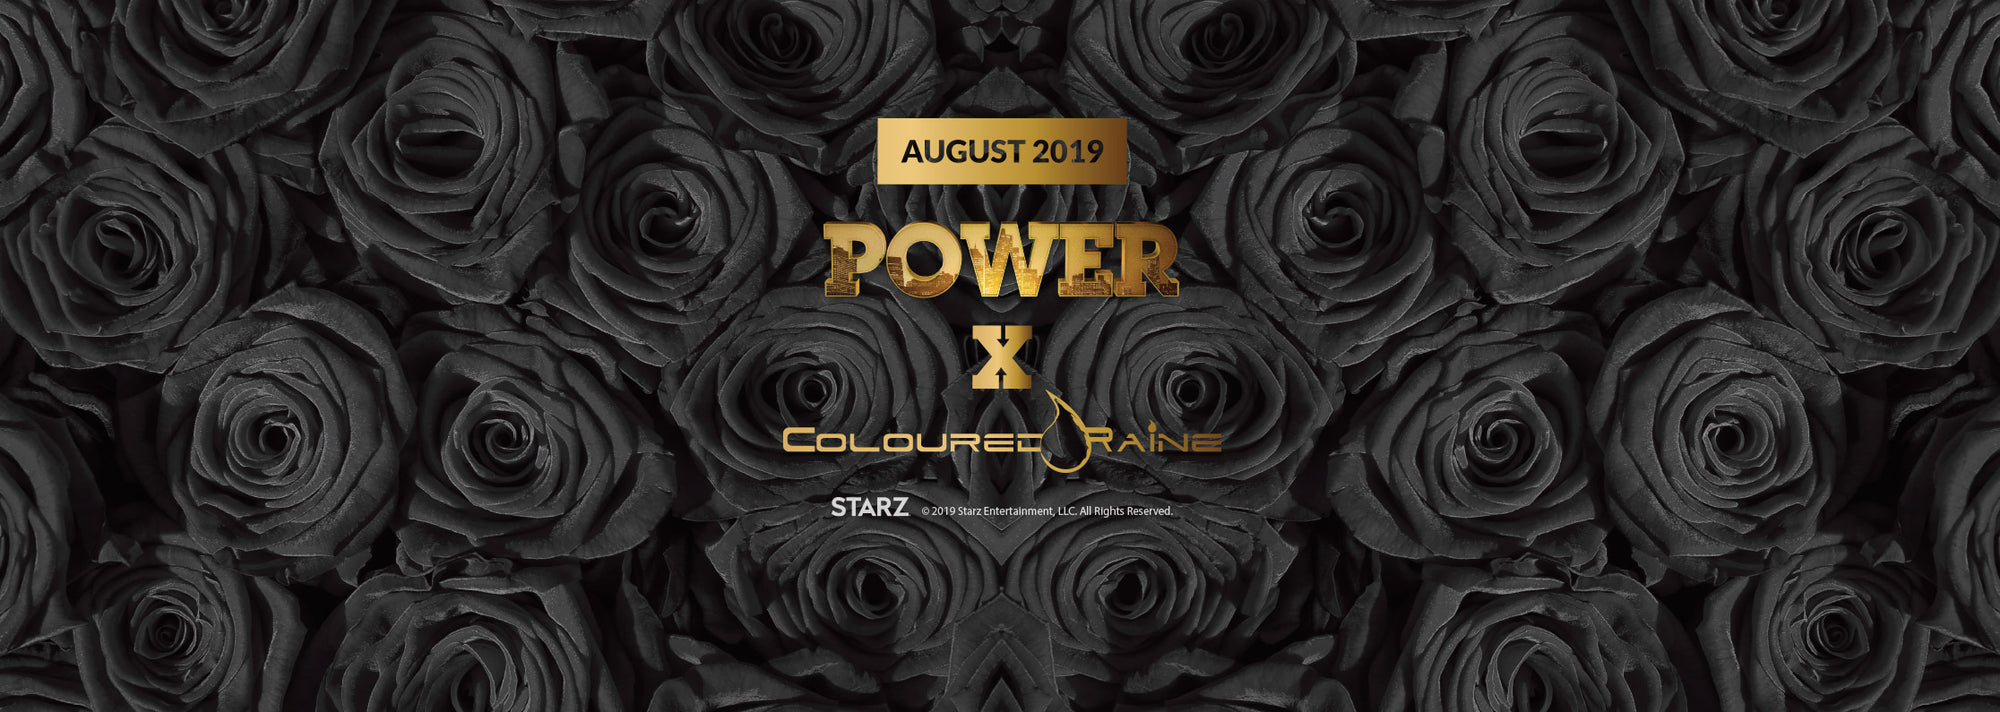 Coloured Raine & “POWER” Collaborate on Makeup Collection